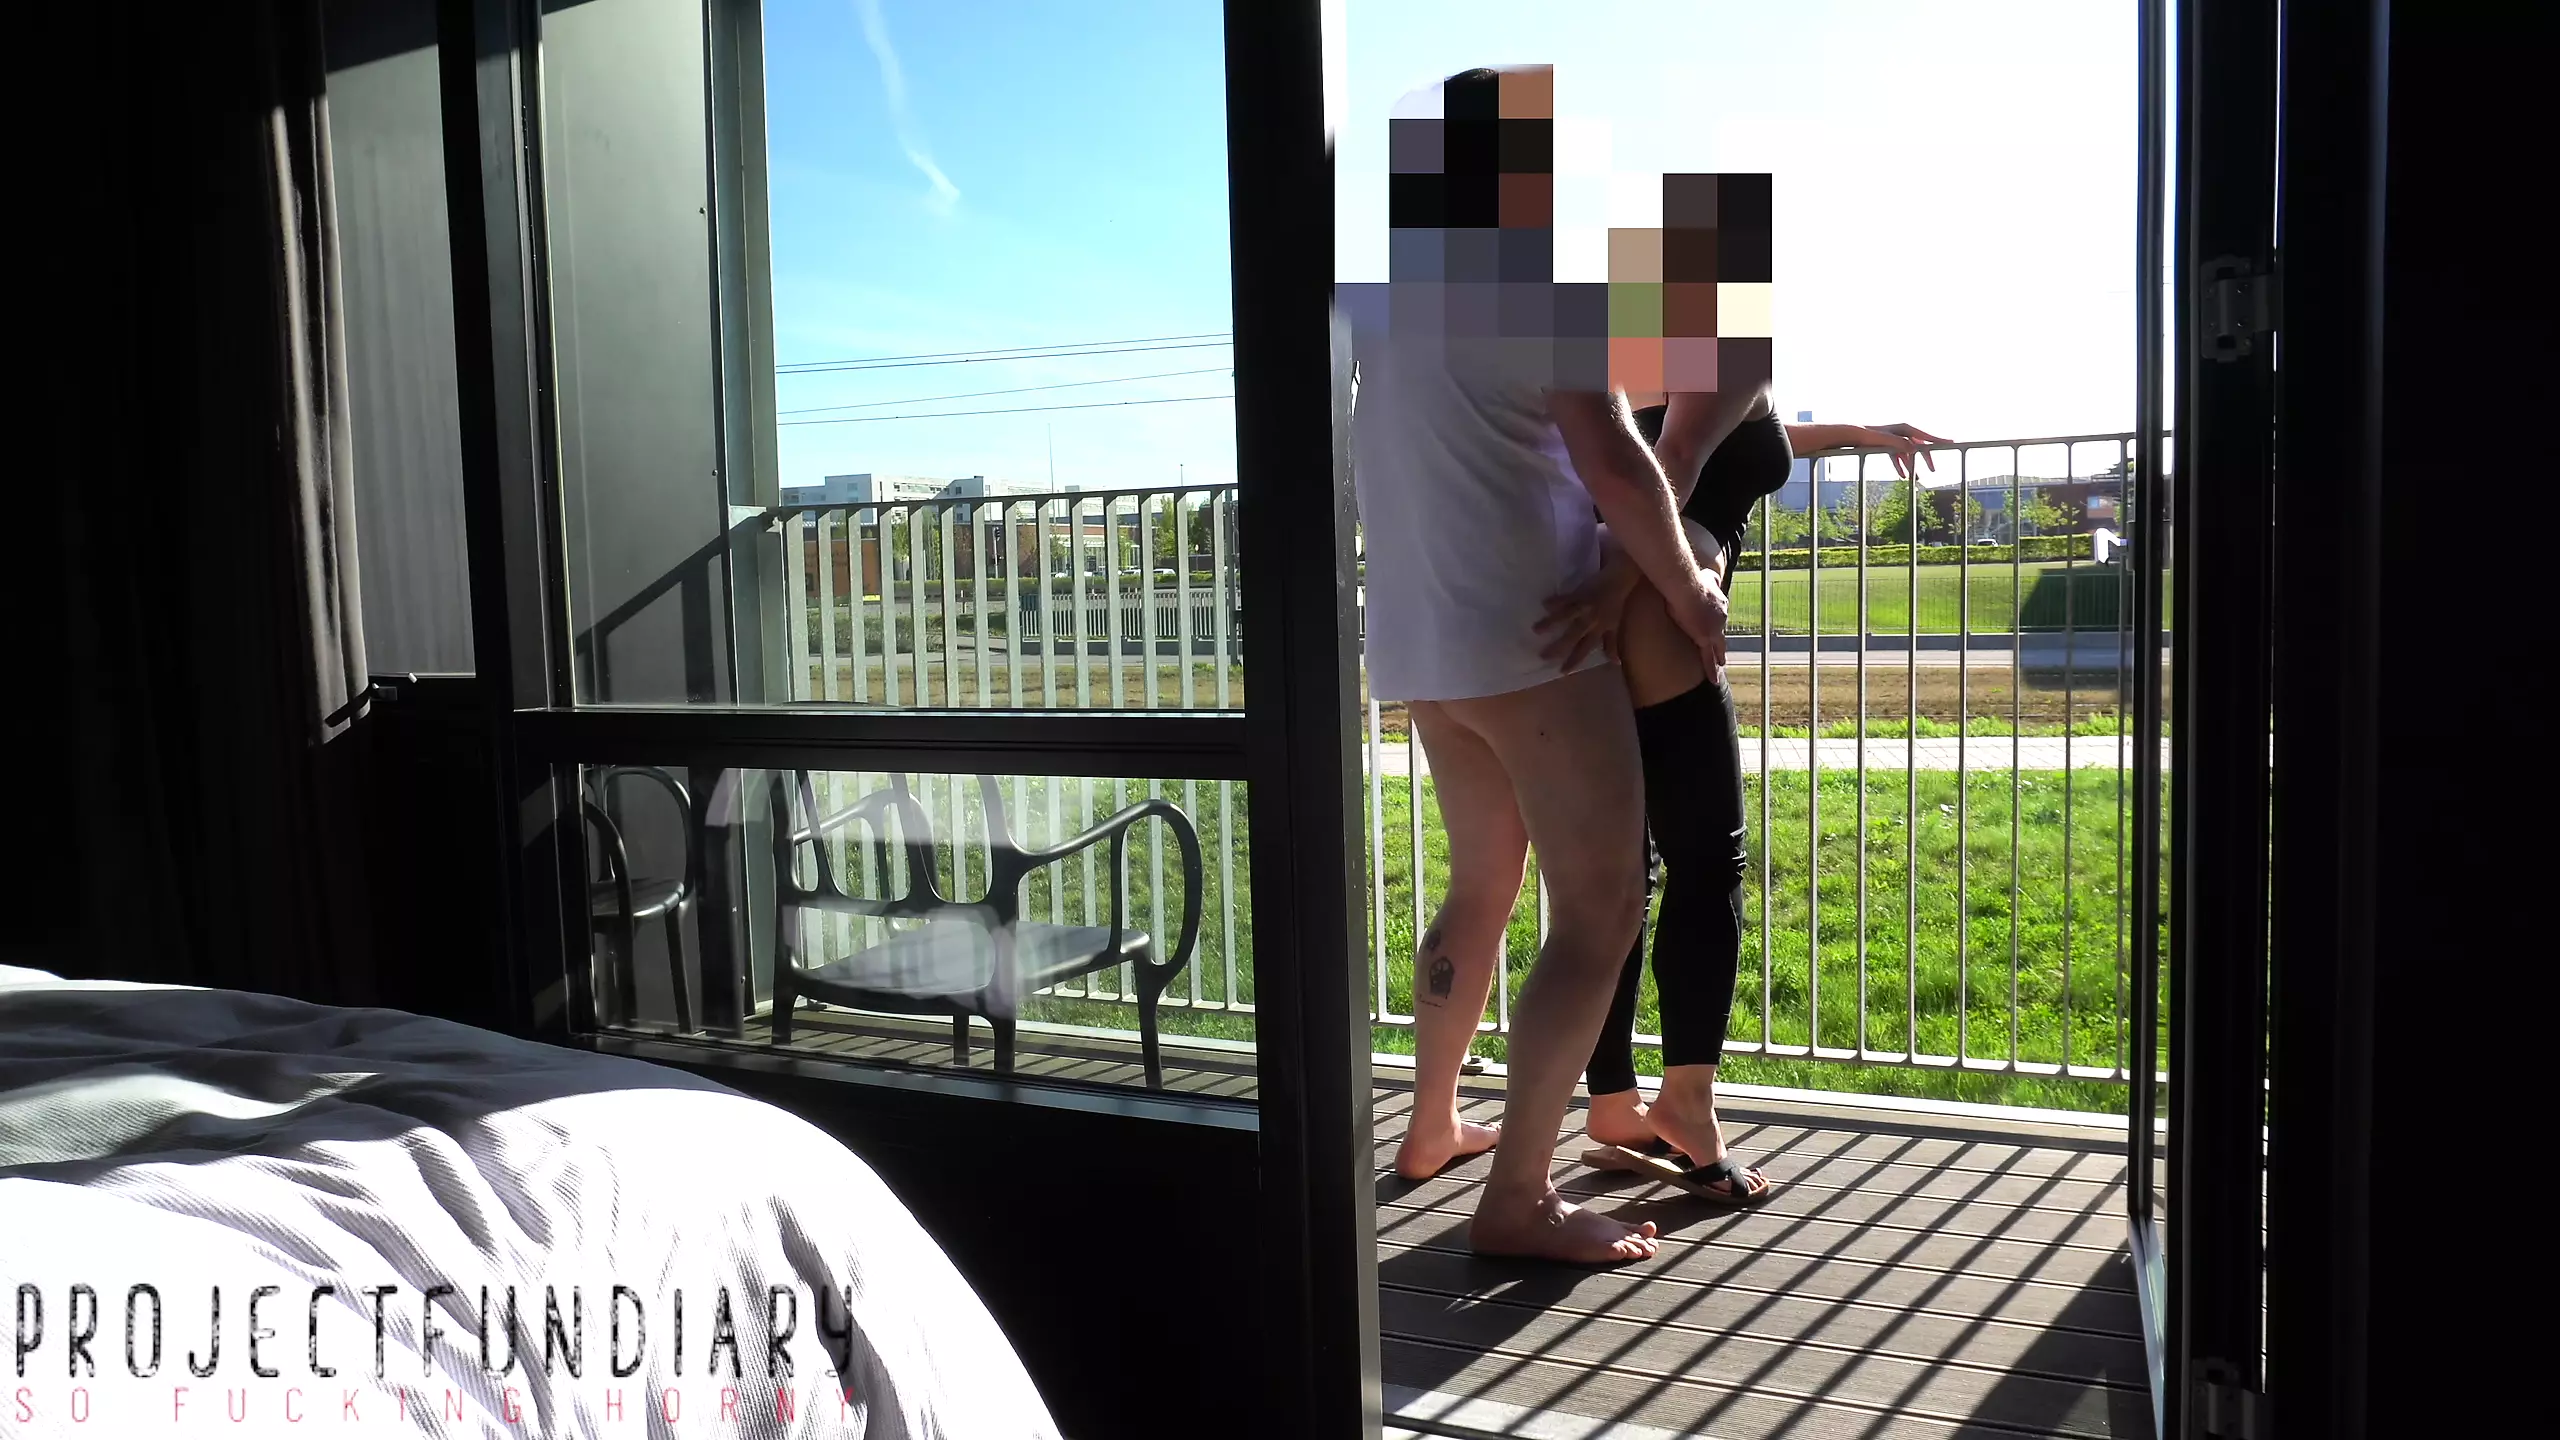 risky public balcony sex with people watching image